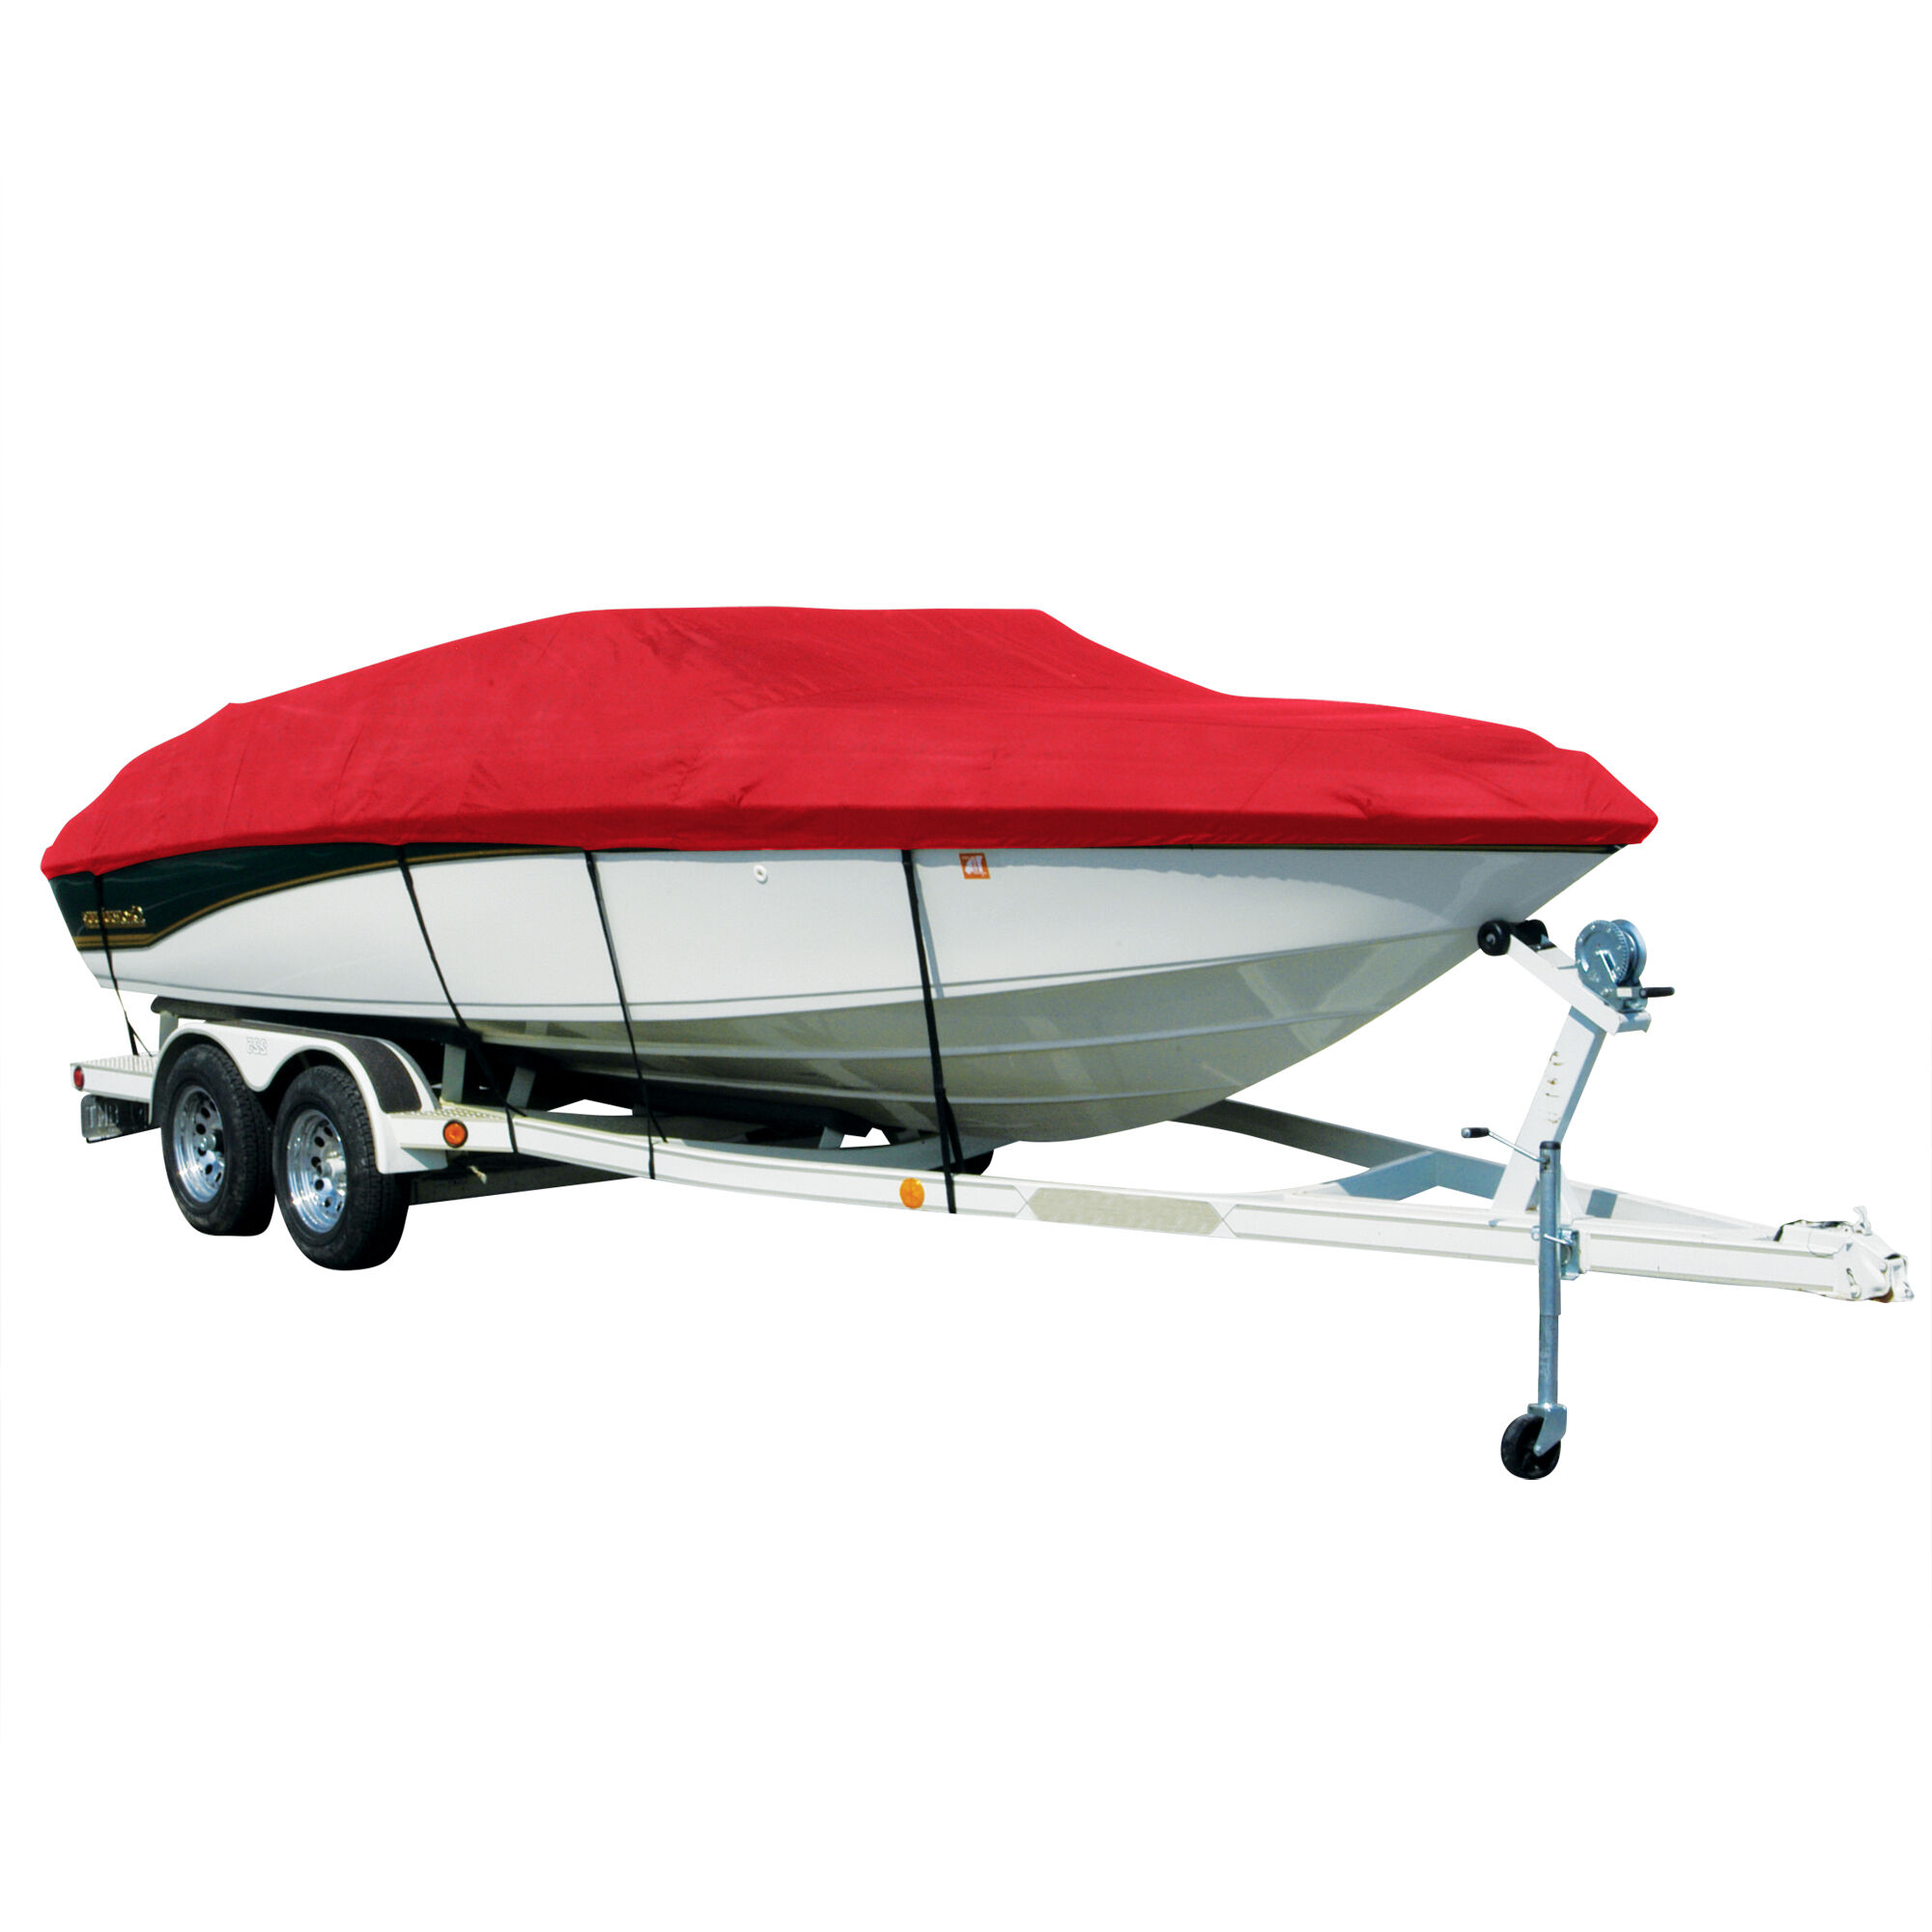 Covermate Sharkskin Plus Exact-Fit Cover for Grady White Islander 26 Islander 26 Walk Around w/ Pulpit Hard Top O/B. Red